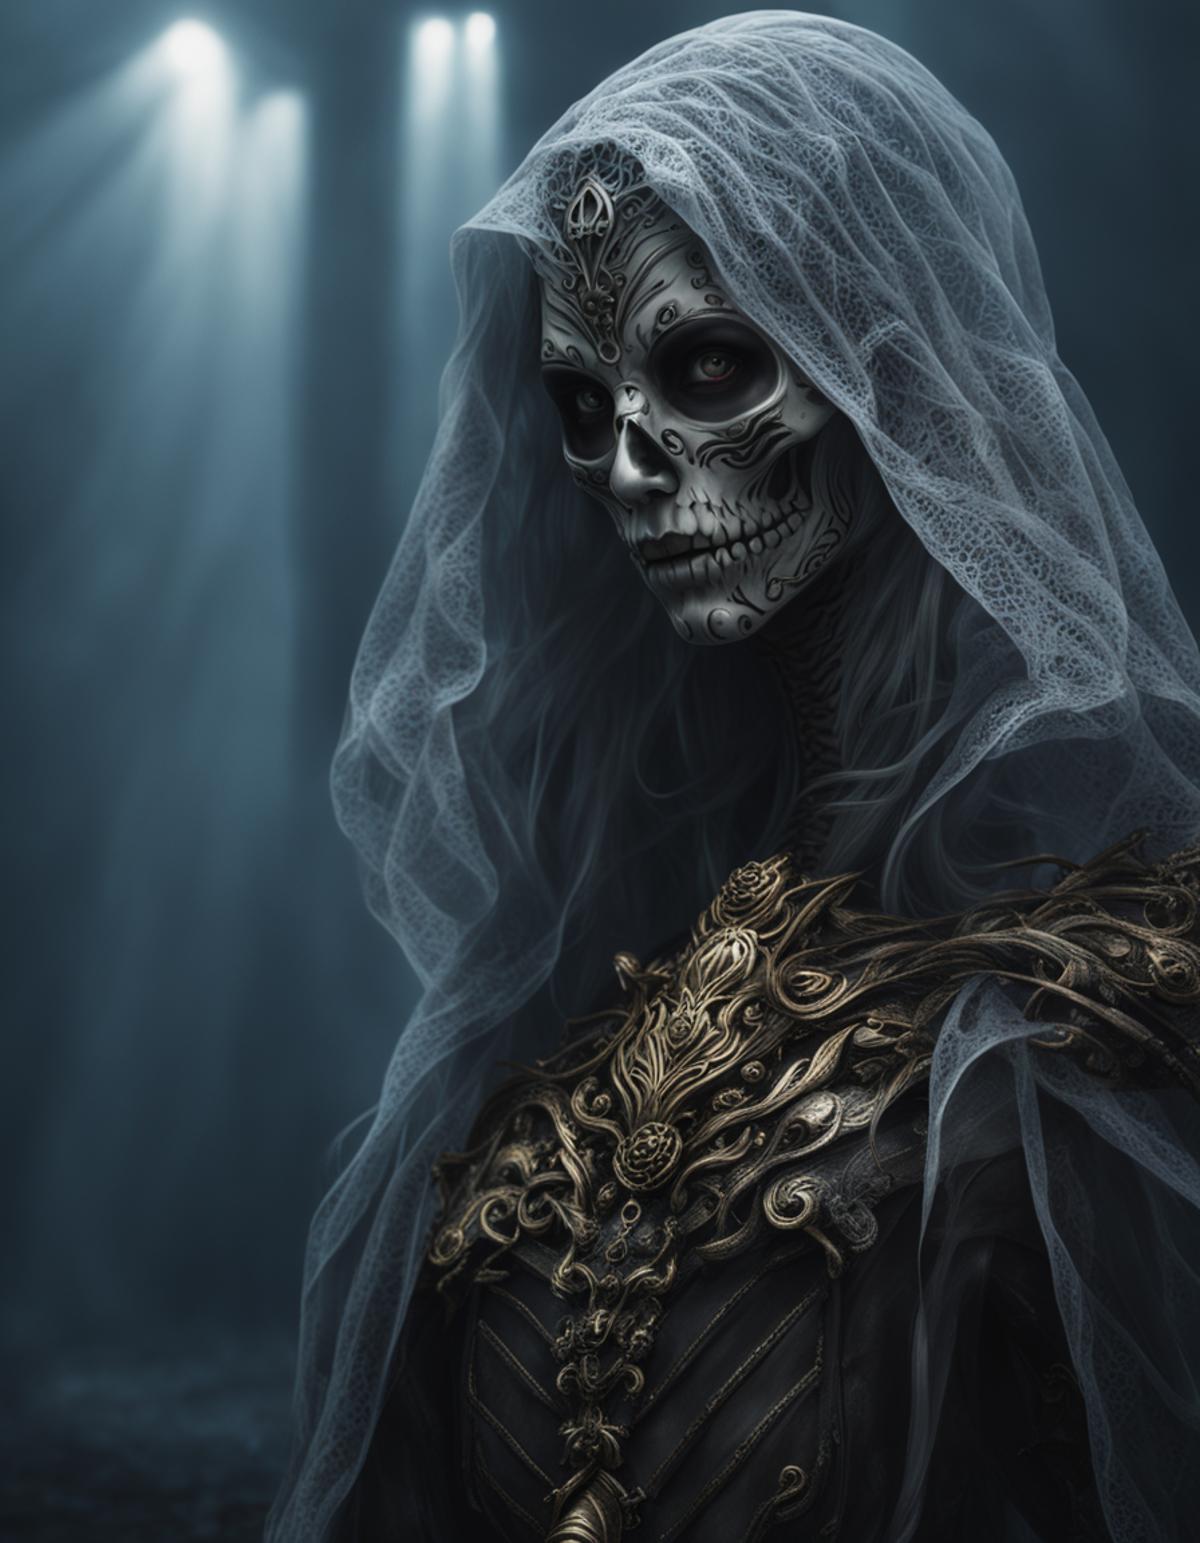 A skeleton wearing a dress, with a veil on its head and a necklace, in a dark and eerie setting.